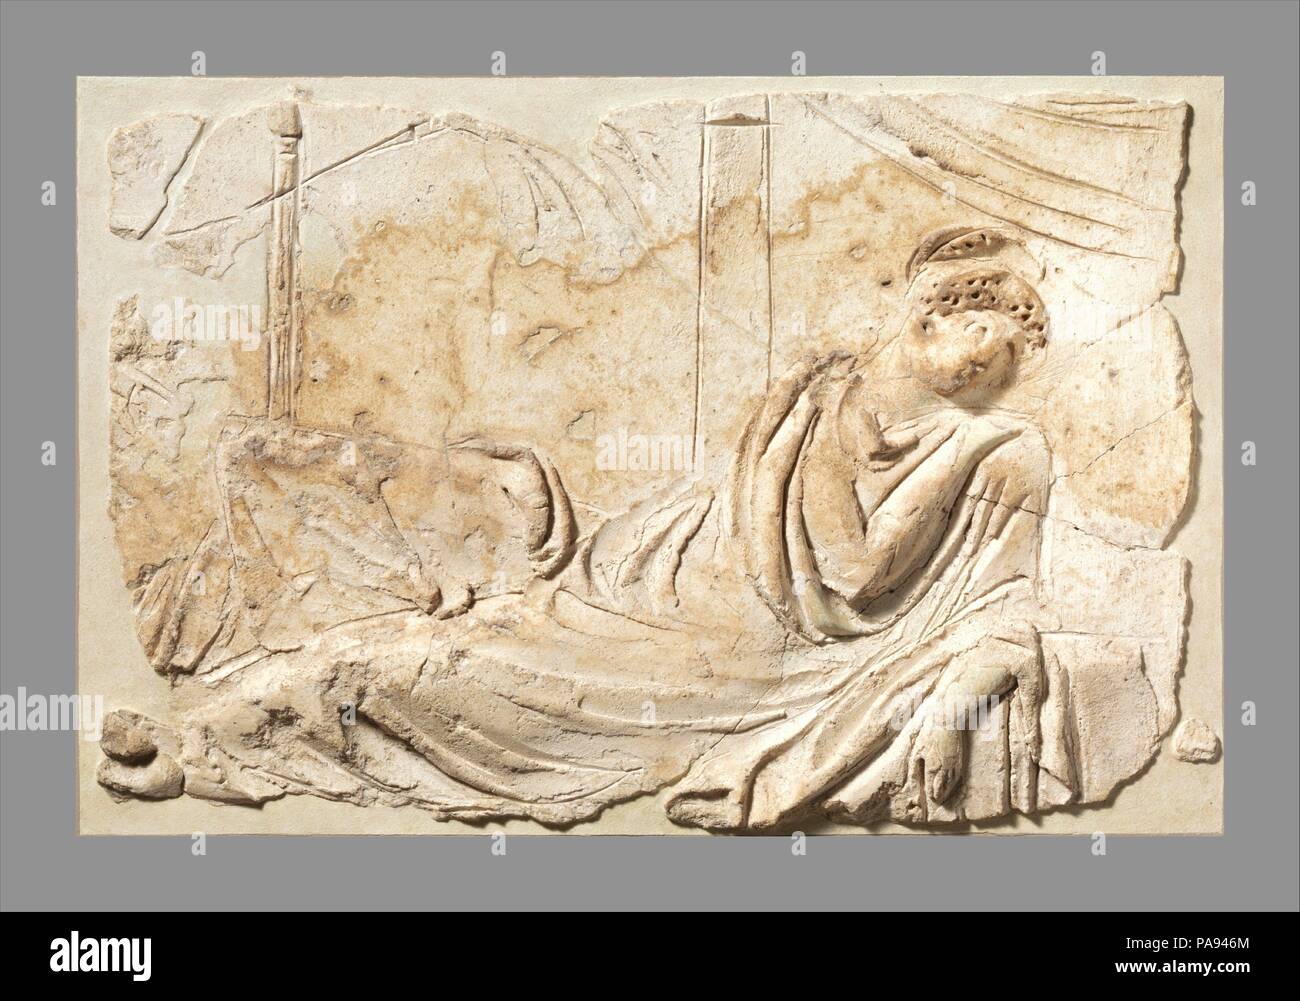 Stucco relief panel. Culture: Roman. Dimensions: Overall: 9 1/2 x 14 3/8 x 2 1/4 in. (24.1 x 36.5 x 5.7 cm). Date: 2nd half of 1st century A.D..  Draped in a heavy cloak and with an elaborate hairdo, the woman reclines with one knee raised. Her left arm rests against a low support. A pillar from which a swag of drapery hangs is visible just behind her right shoulder and another slender, fluted column stands to the left. A long, thin palm-like branch sketched lightly in the background at the upper left must have been held by another figure, who was approaching the resting woman. Given the Diony Stock Photo